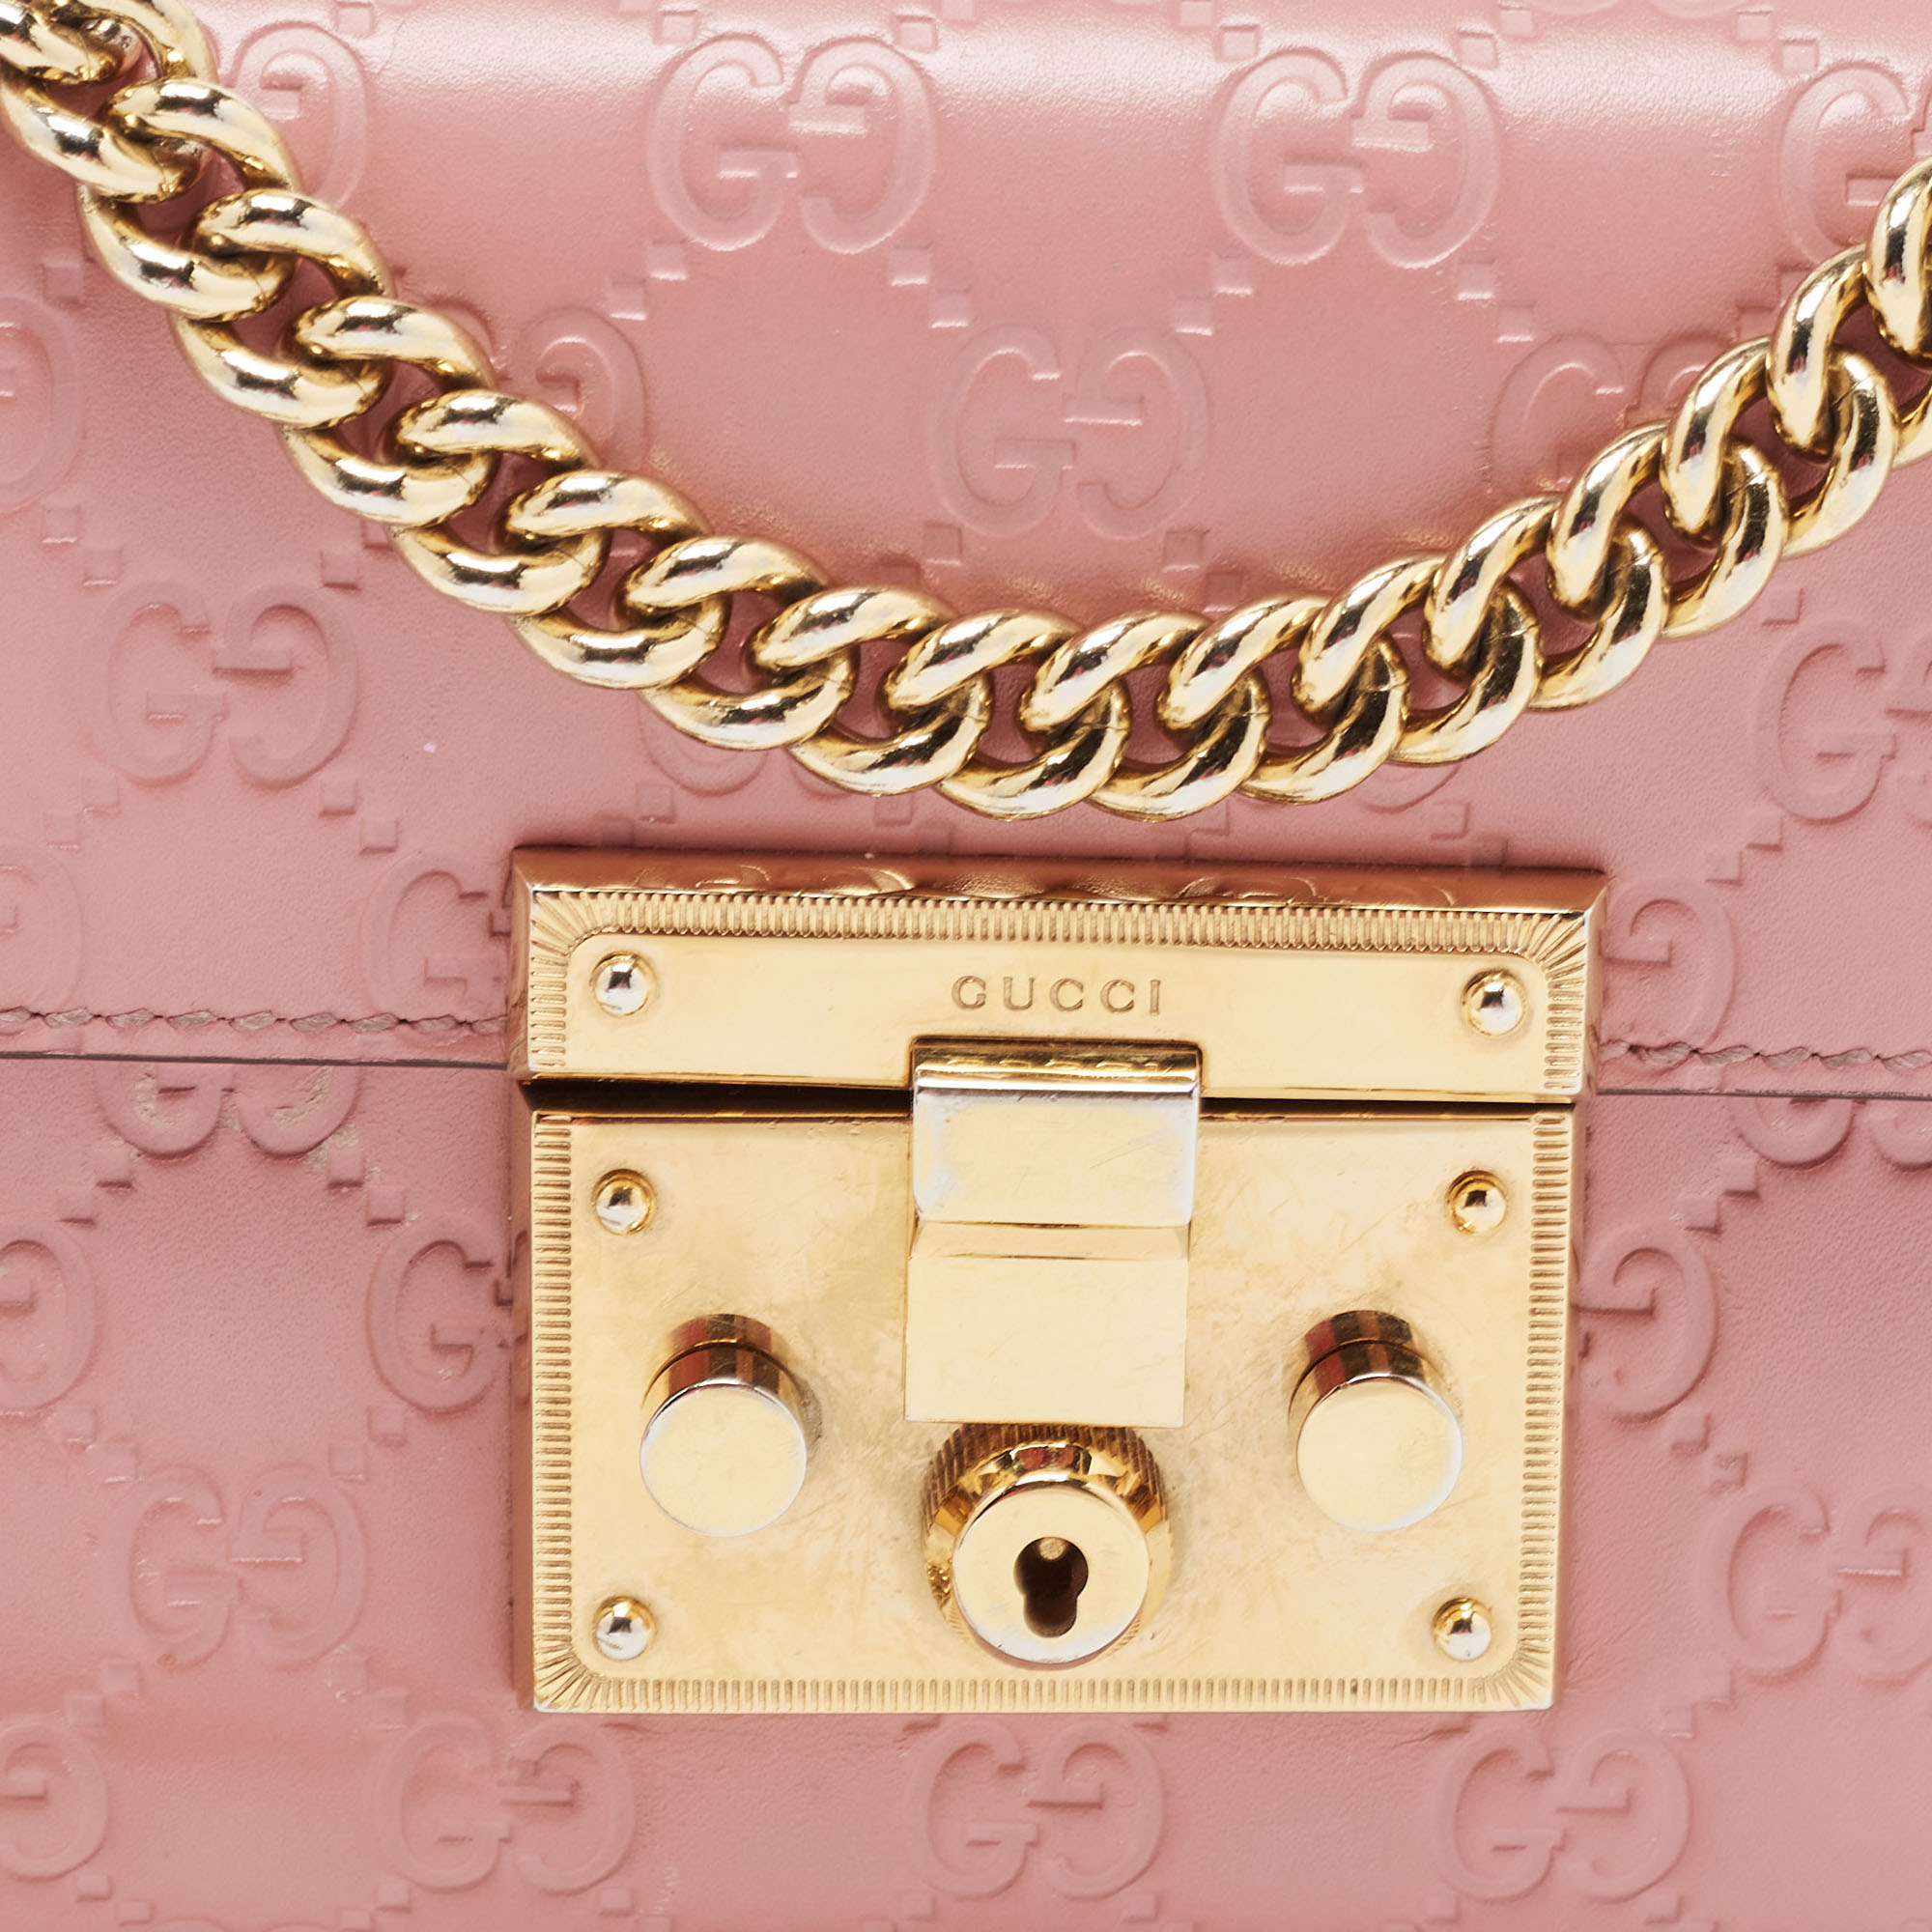 Gucci Pink Guccissima Leather Small Padlock Shoulder Bag